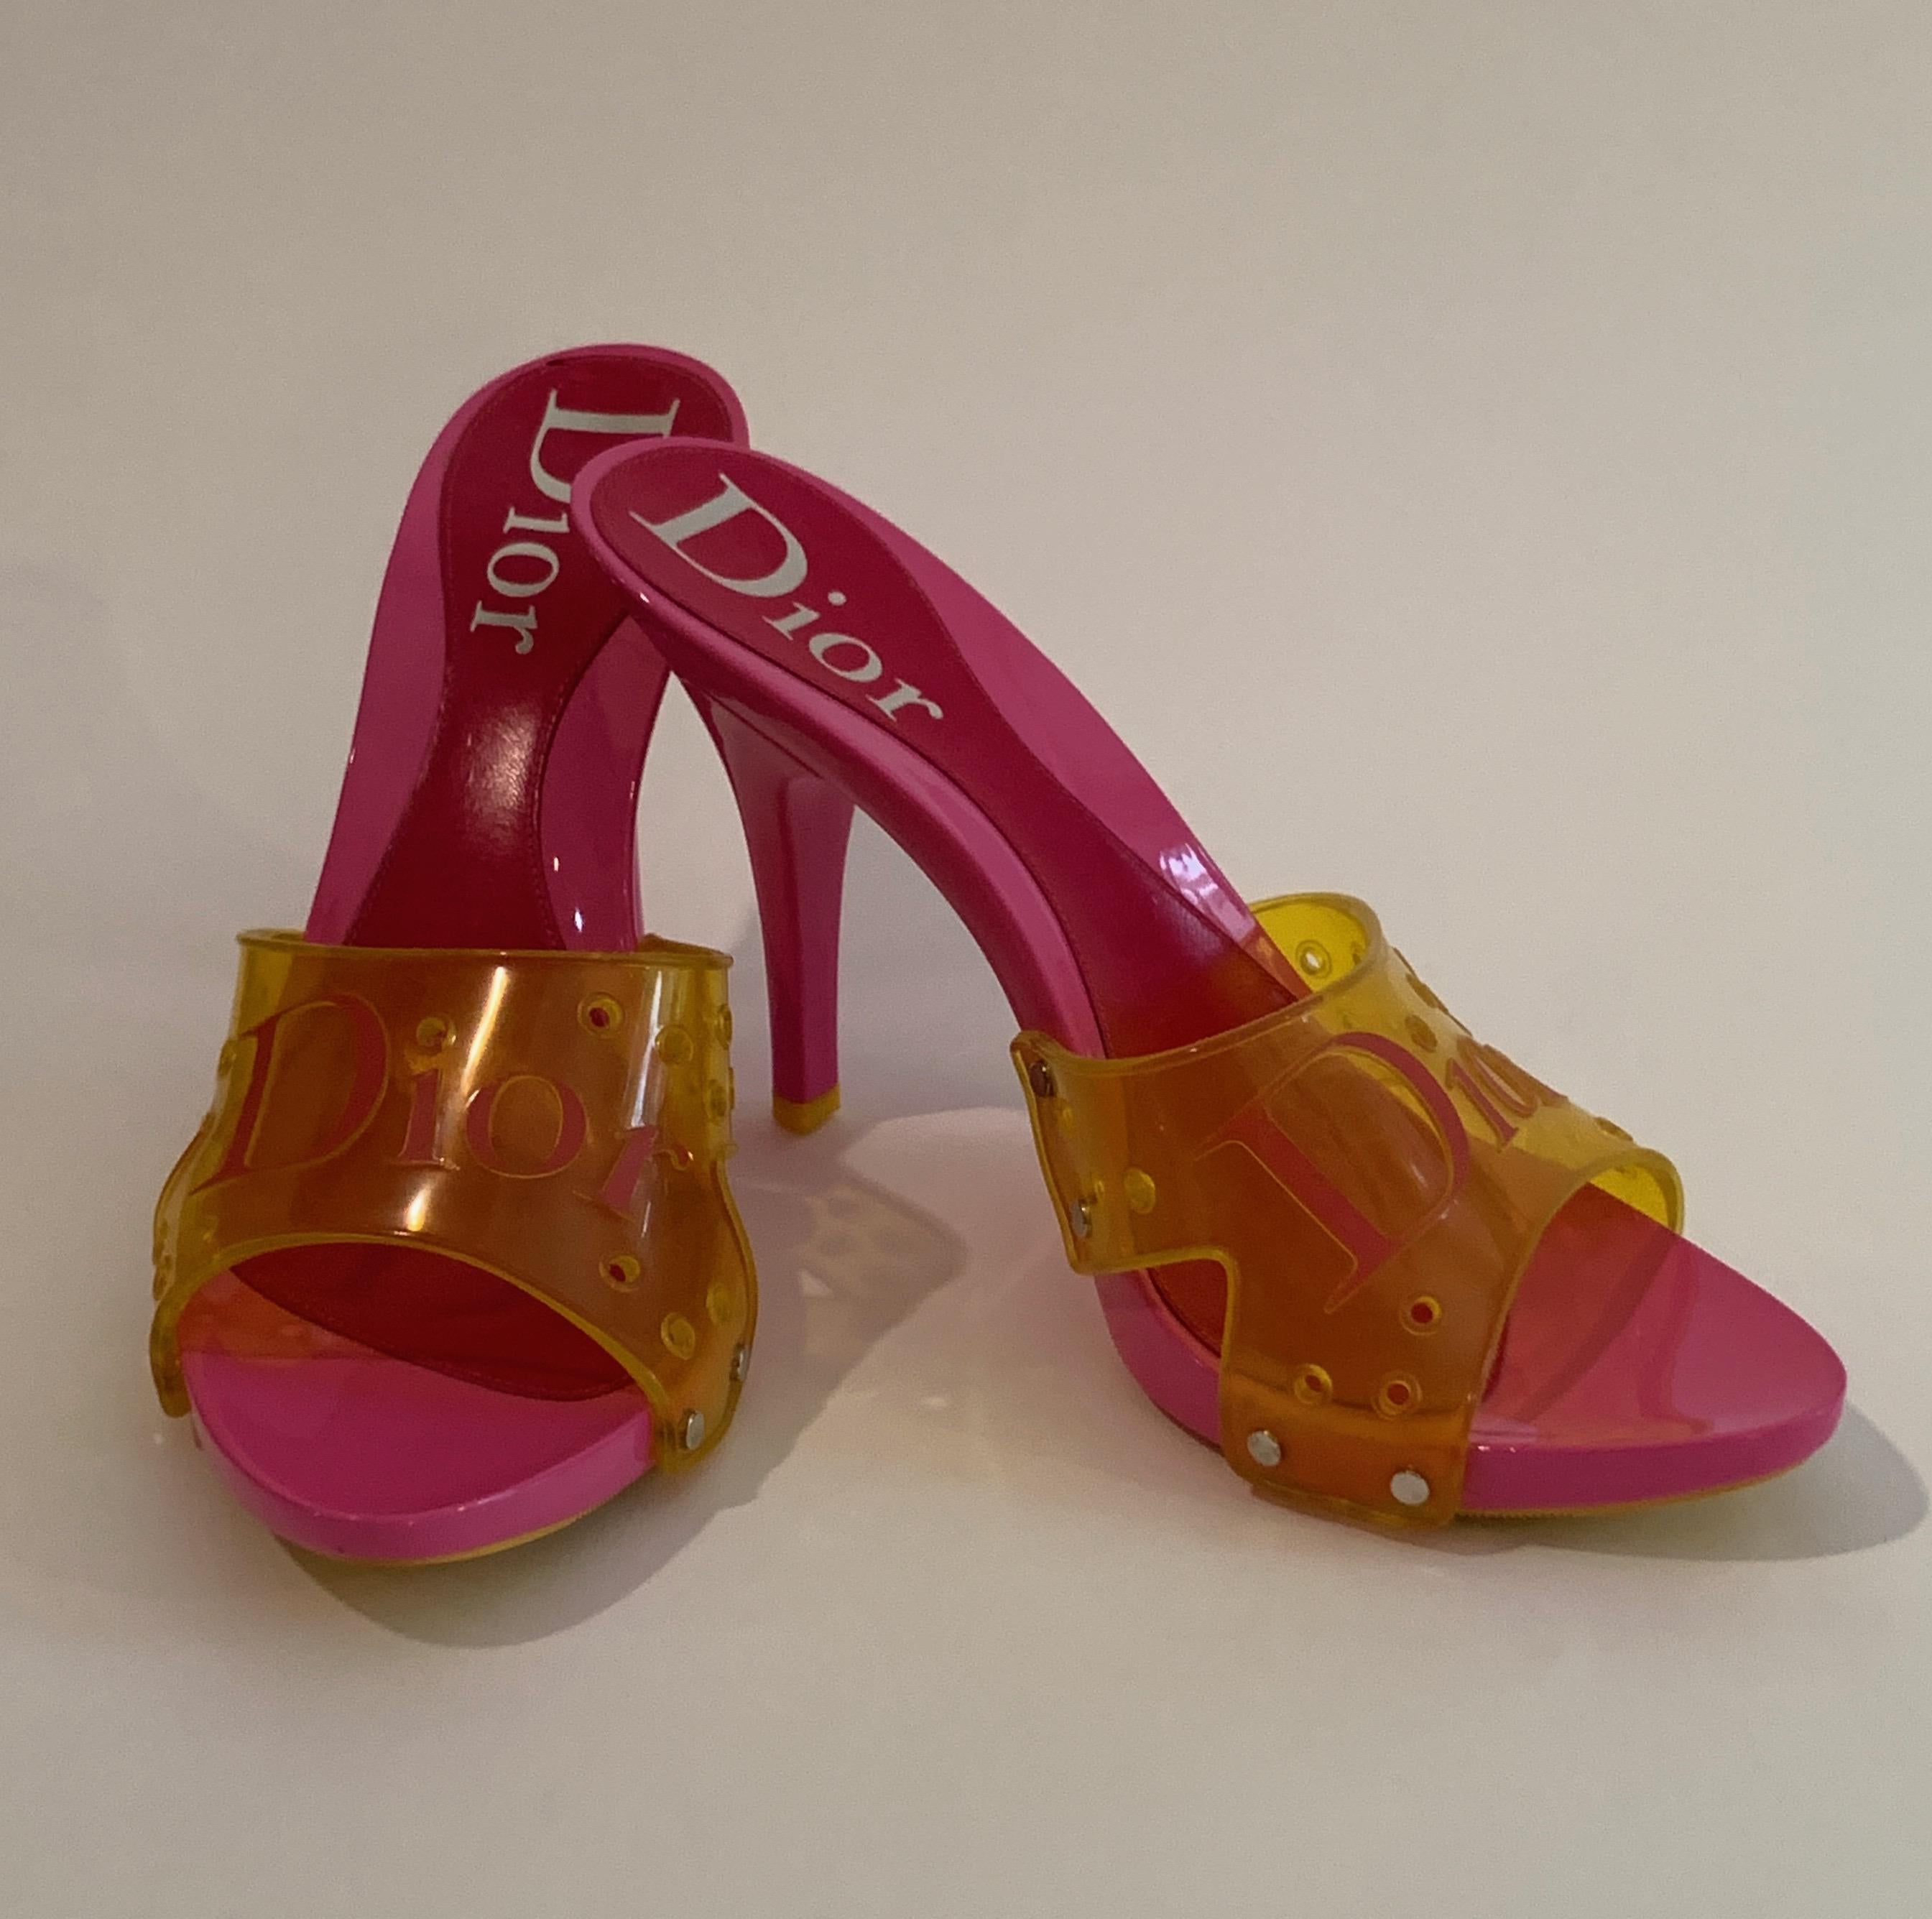 Christian Dior bright pink resin sandals with high heels and yellow PVC uppers with Pink Dior logo and perforated detailing. Heels approximately 4 1/2